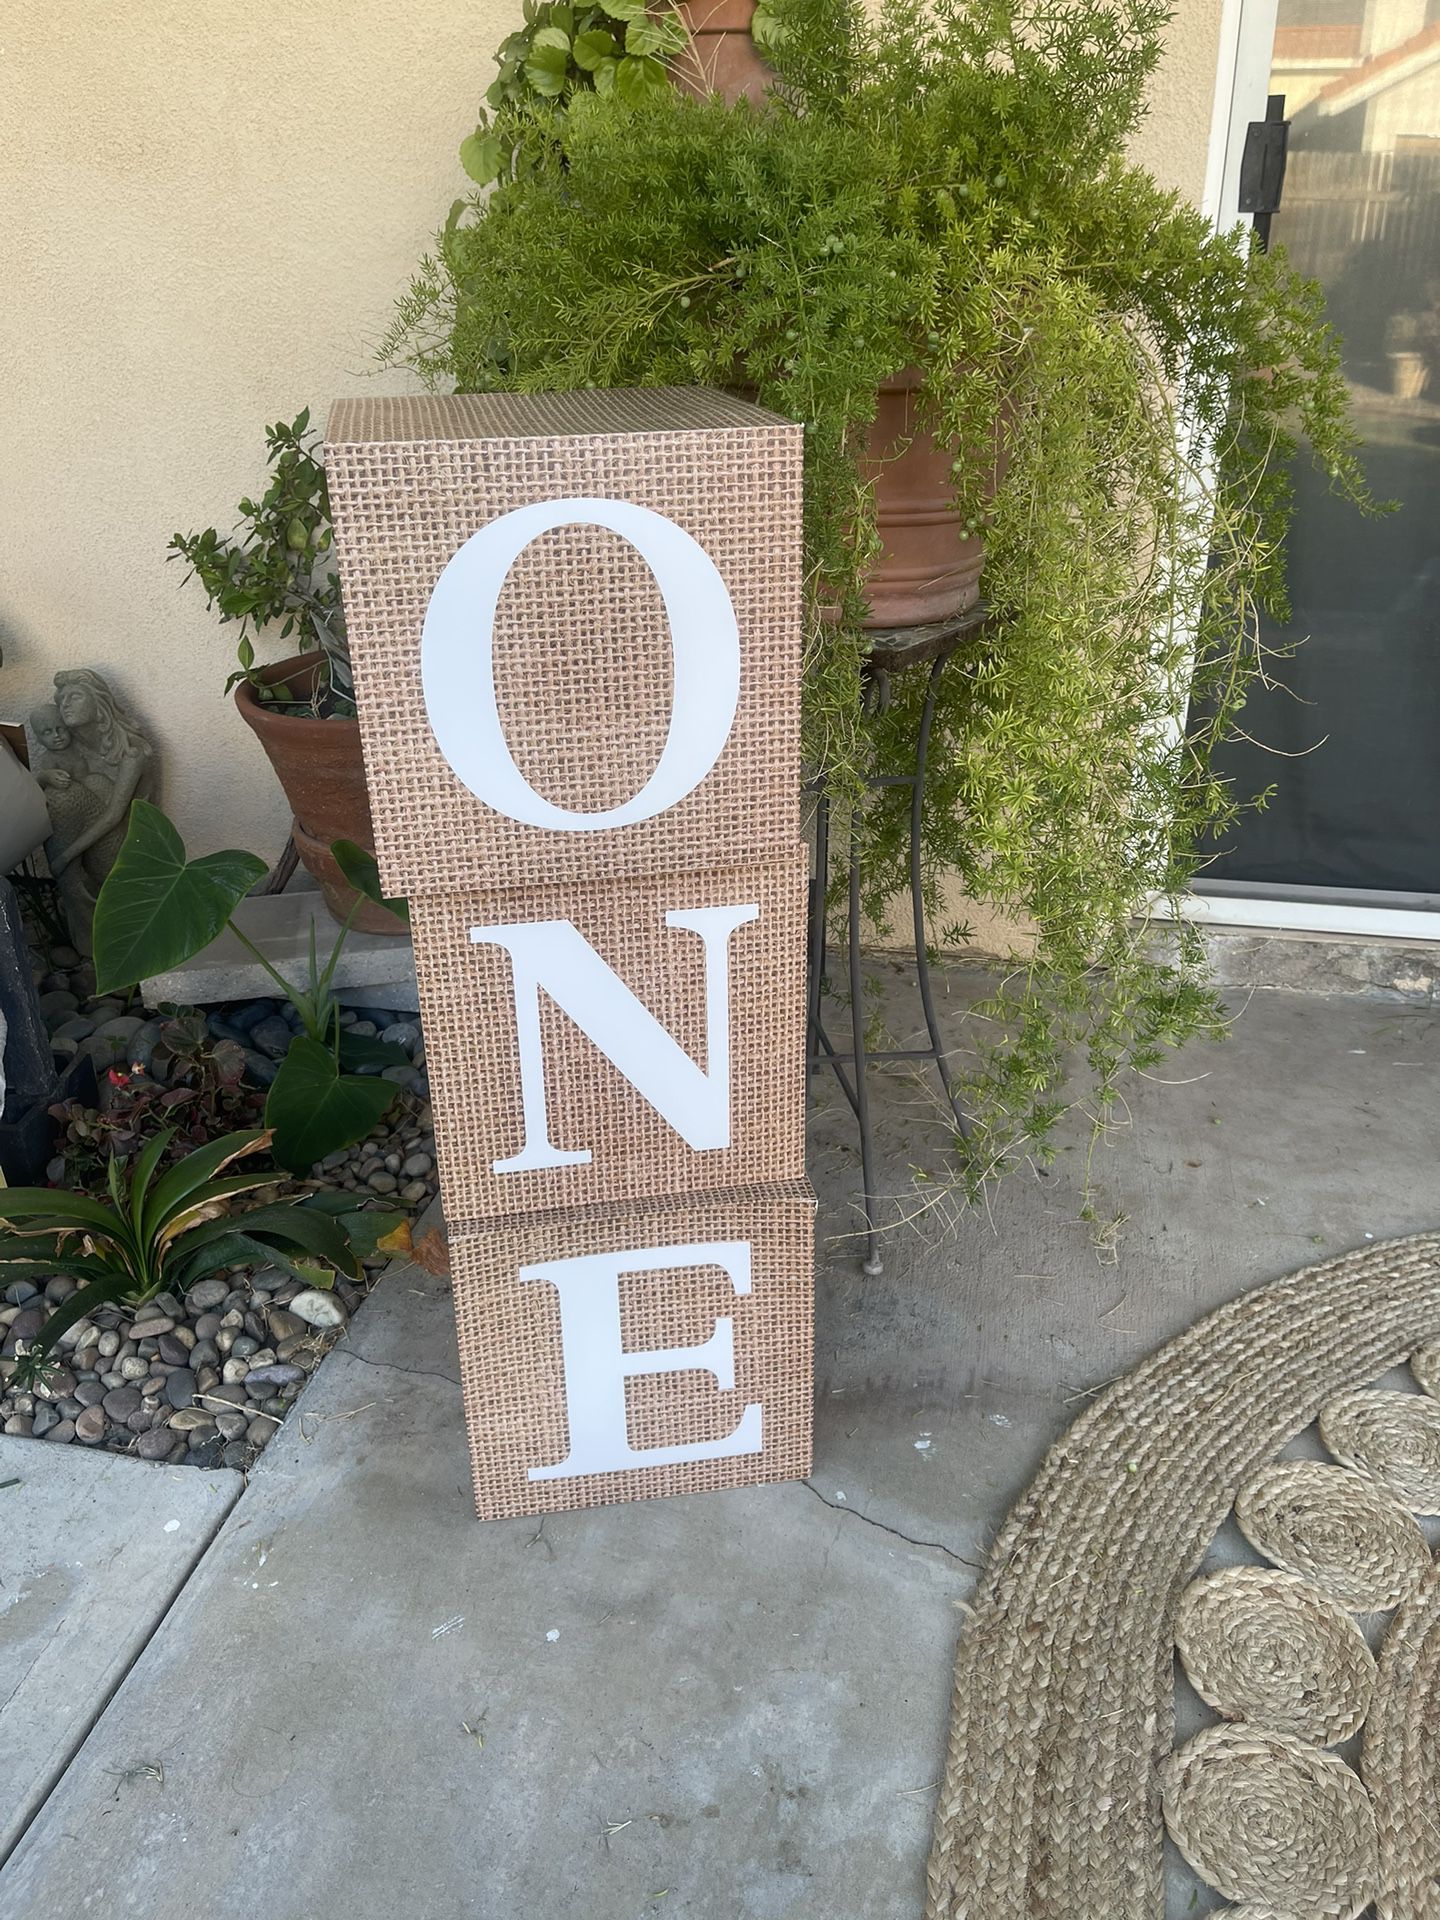 Burlap Printed “ONE” Box Letters